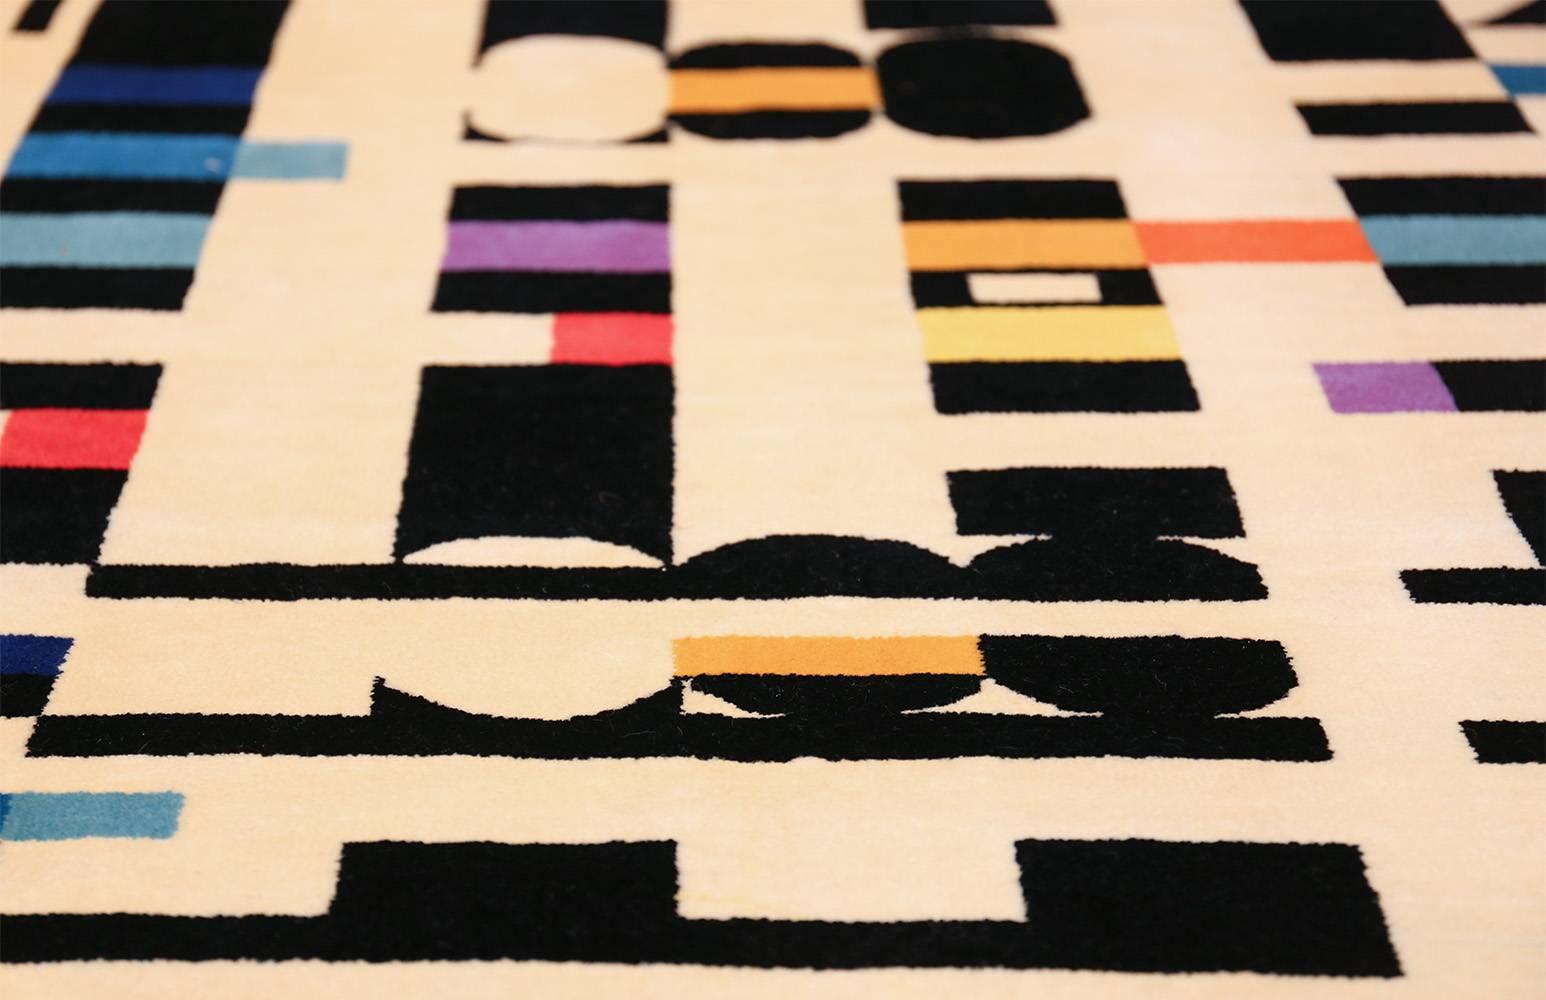 20th Century Vintage Geometric Israeli Rug by Yaacov Agam. Size: 5 ft 7 in x 7 ft 1 in